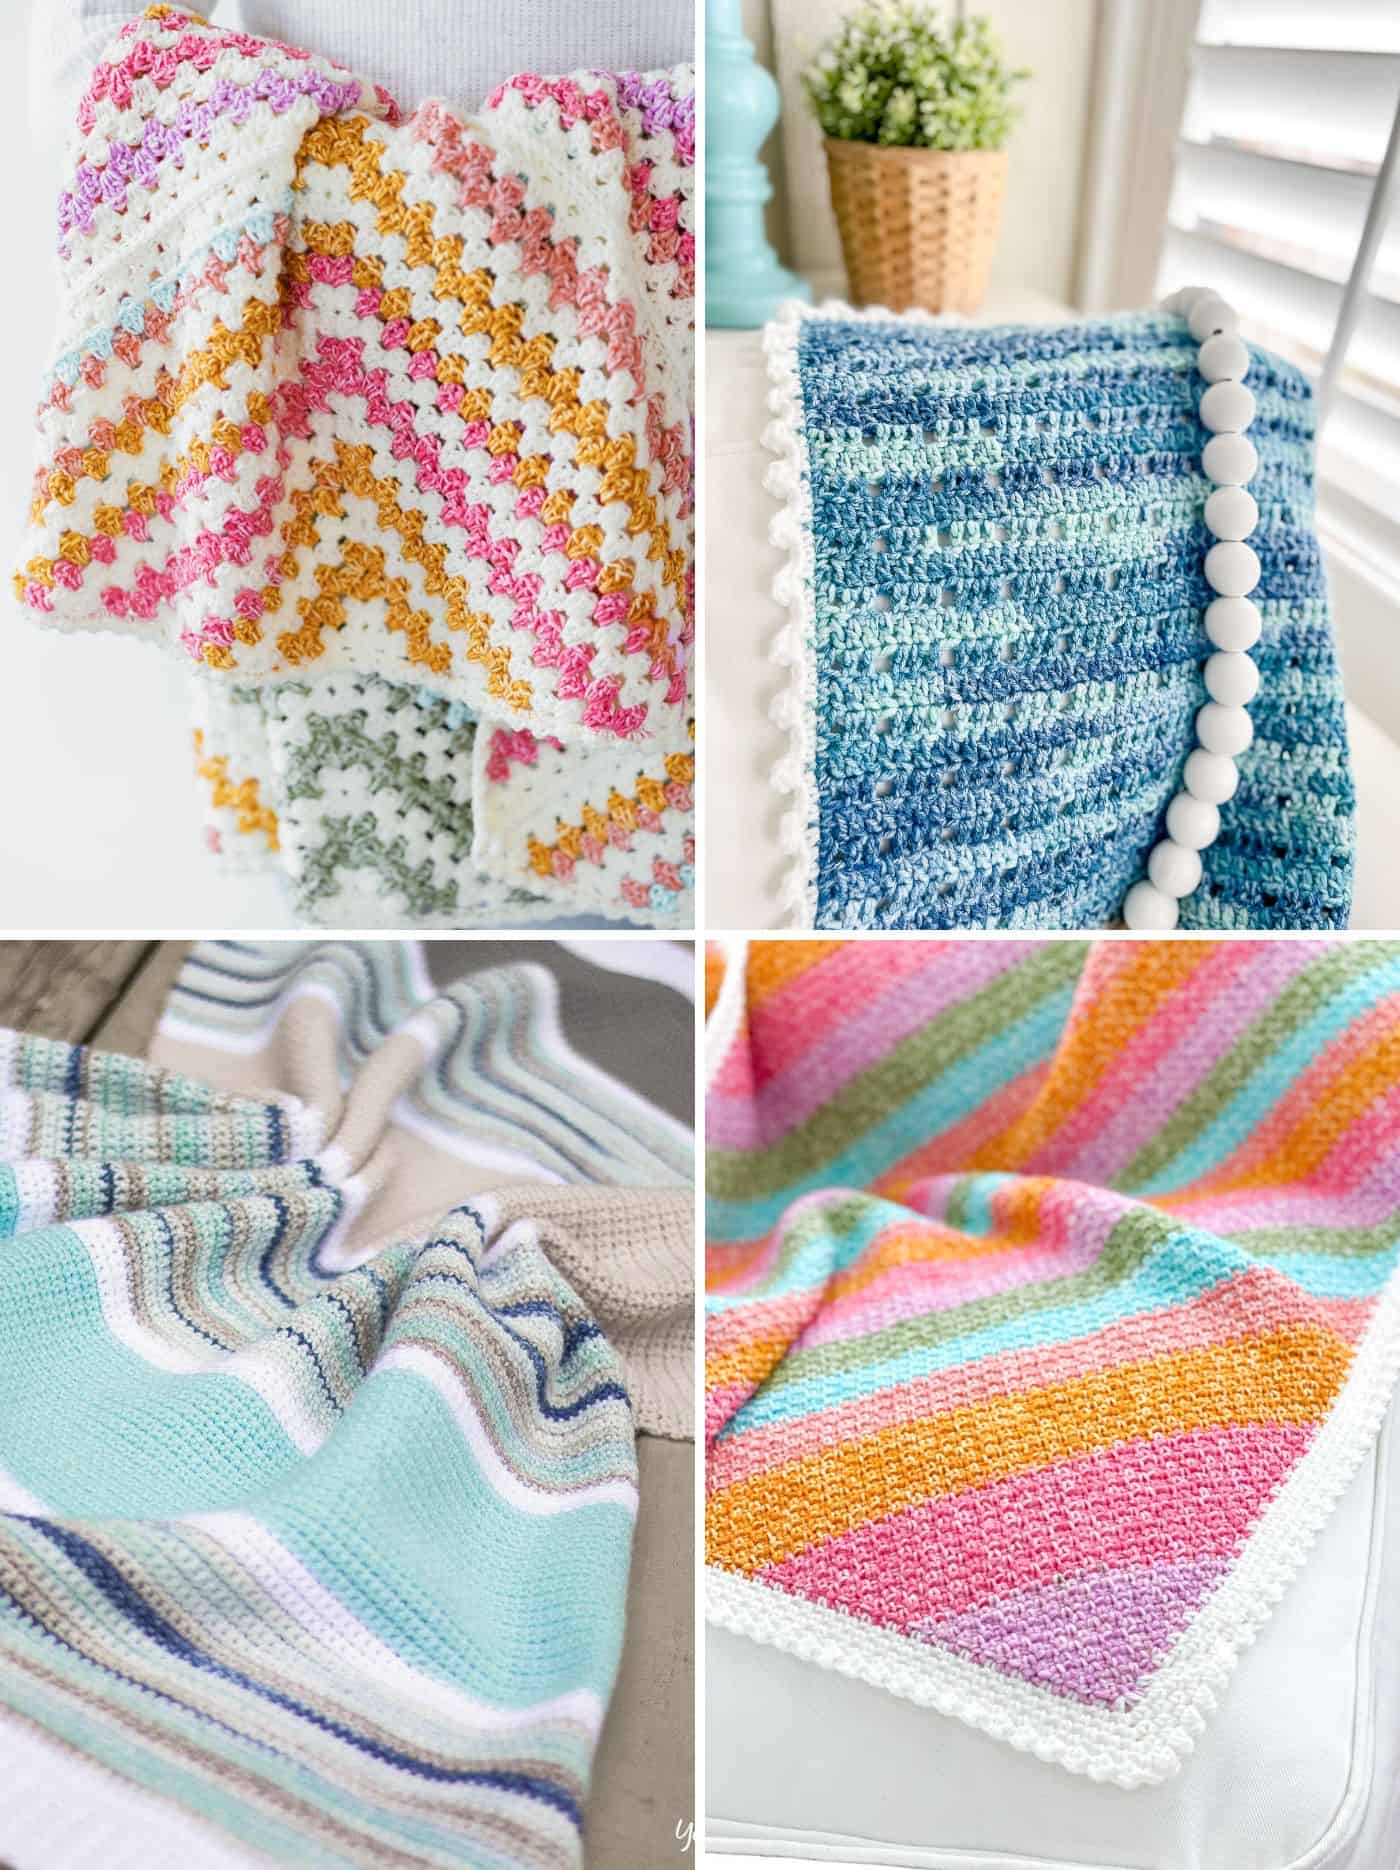 17 Variegated Yarn Crochet Patterns (All Free!) - Daisy Cottage Designs